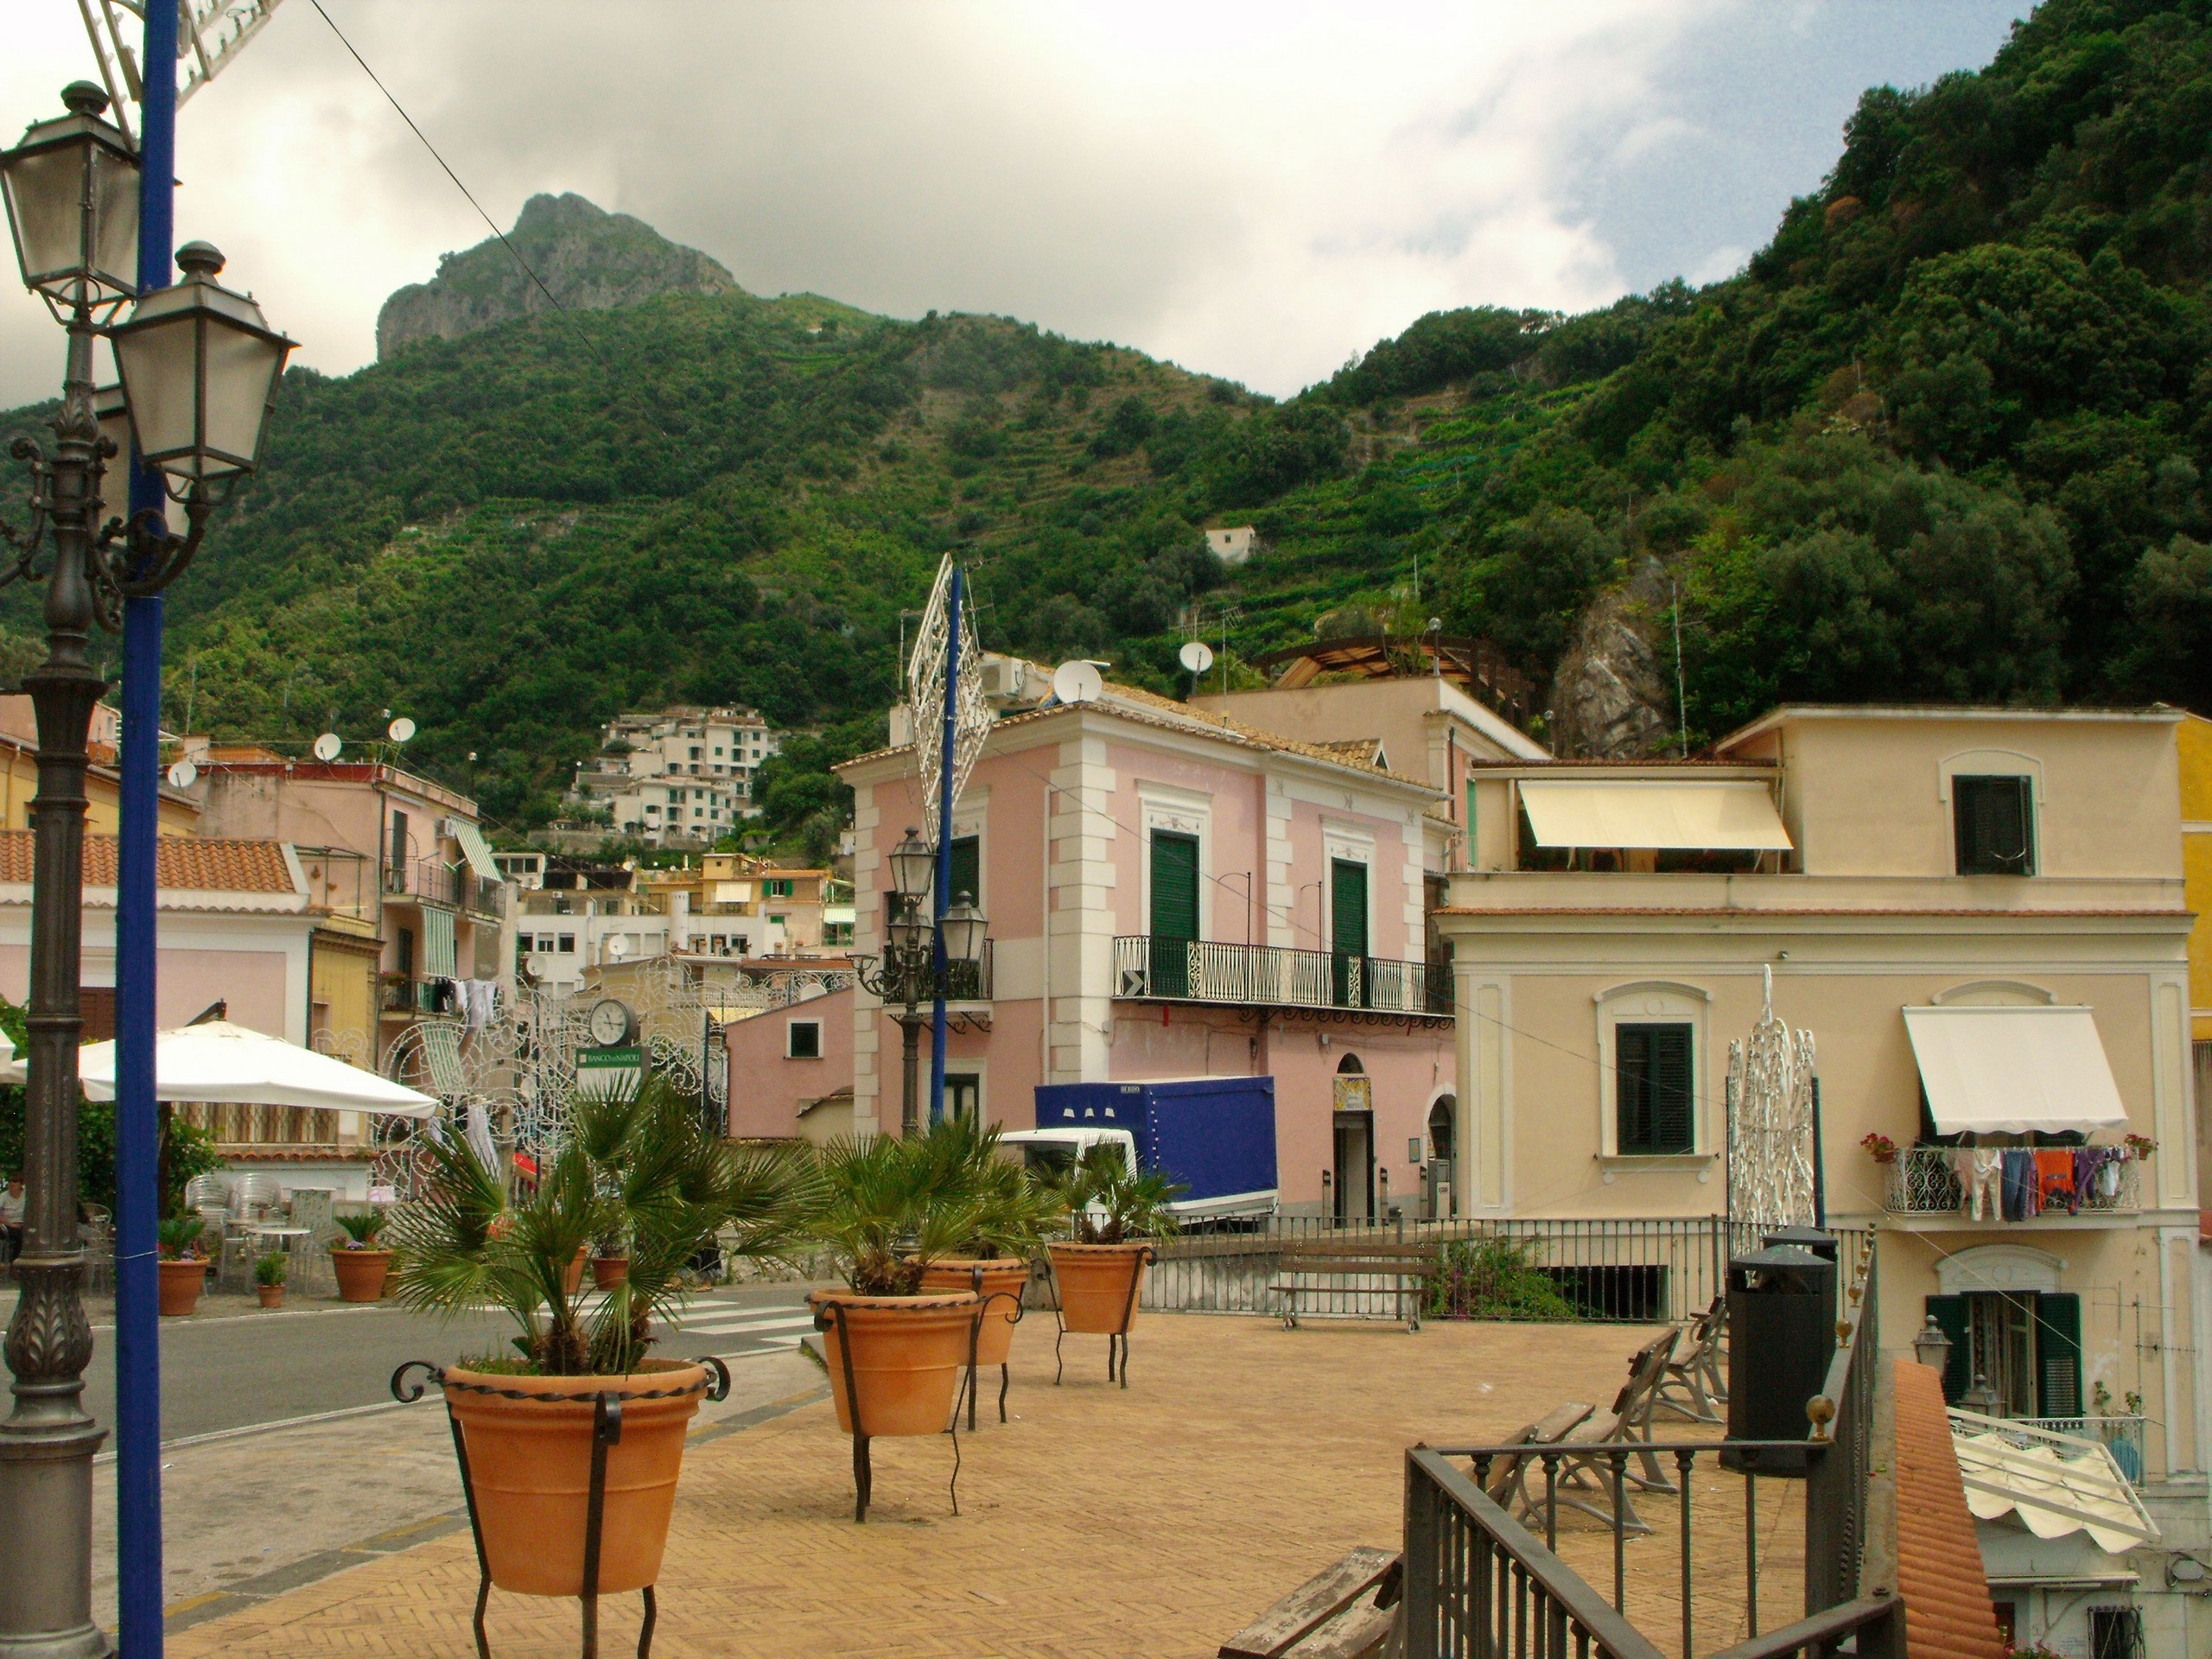 Small cozy street in one of the small towns of Amalfi